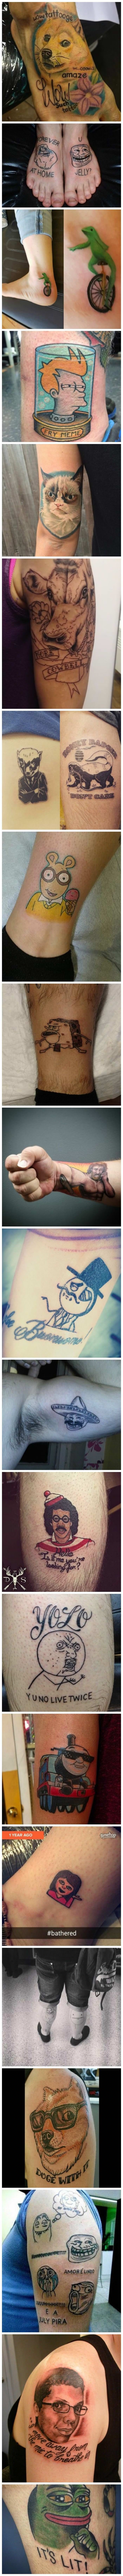 meme tattoos funny picture